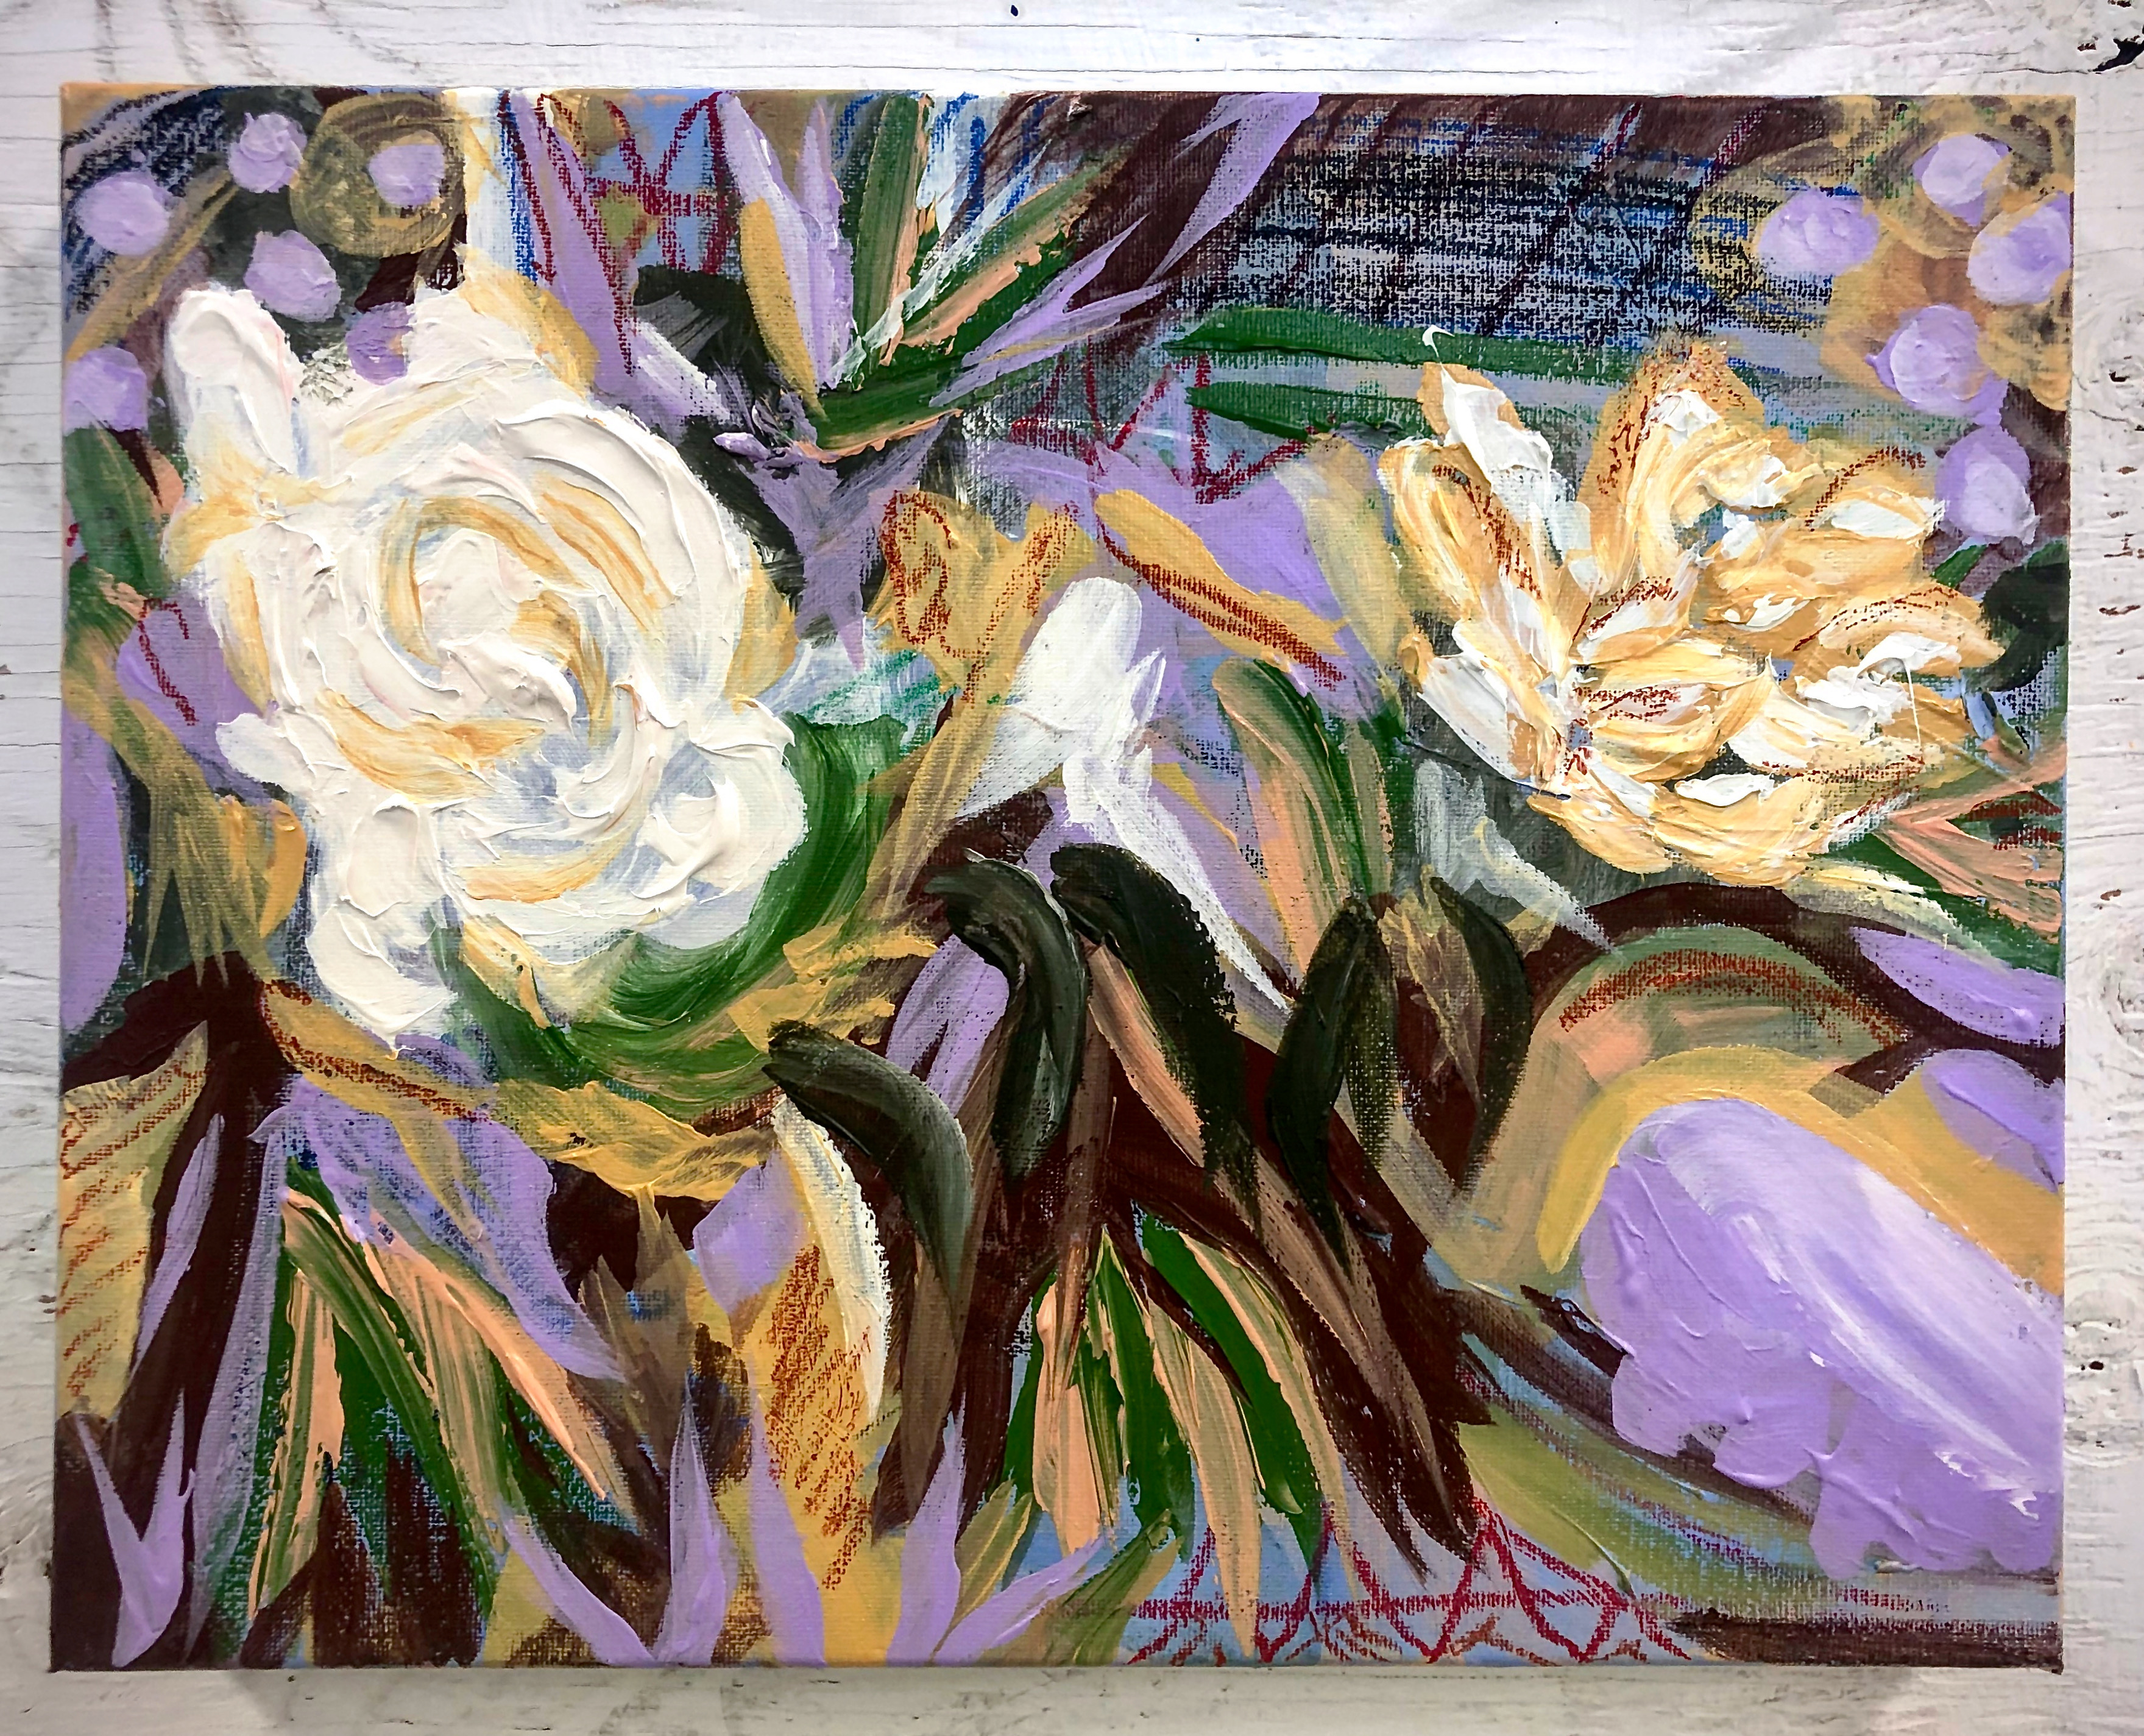 Painting of white flowers surrounded by green and brown leaves against a purple background.